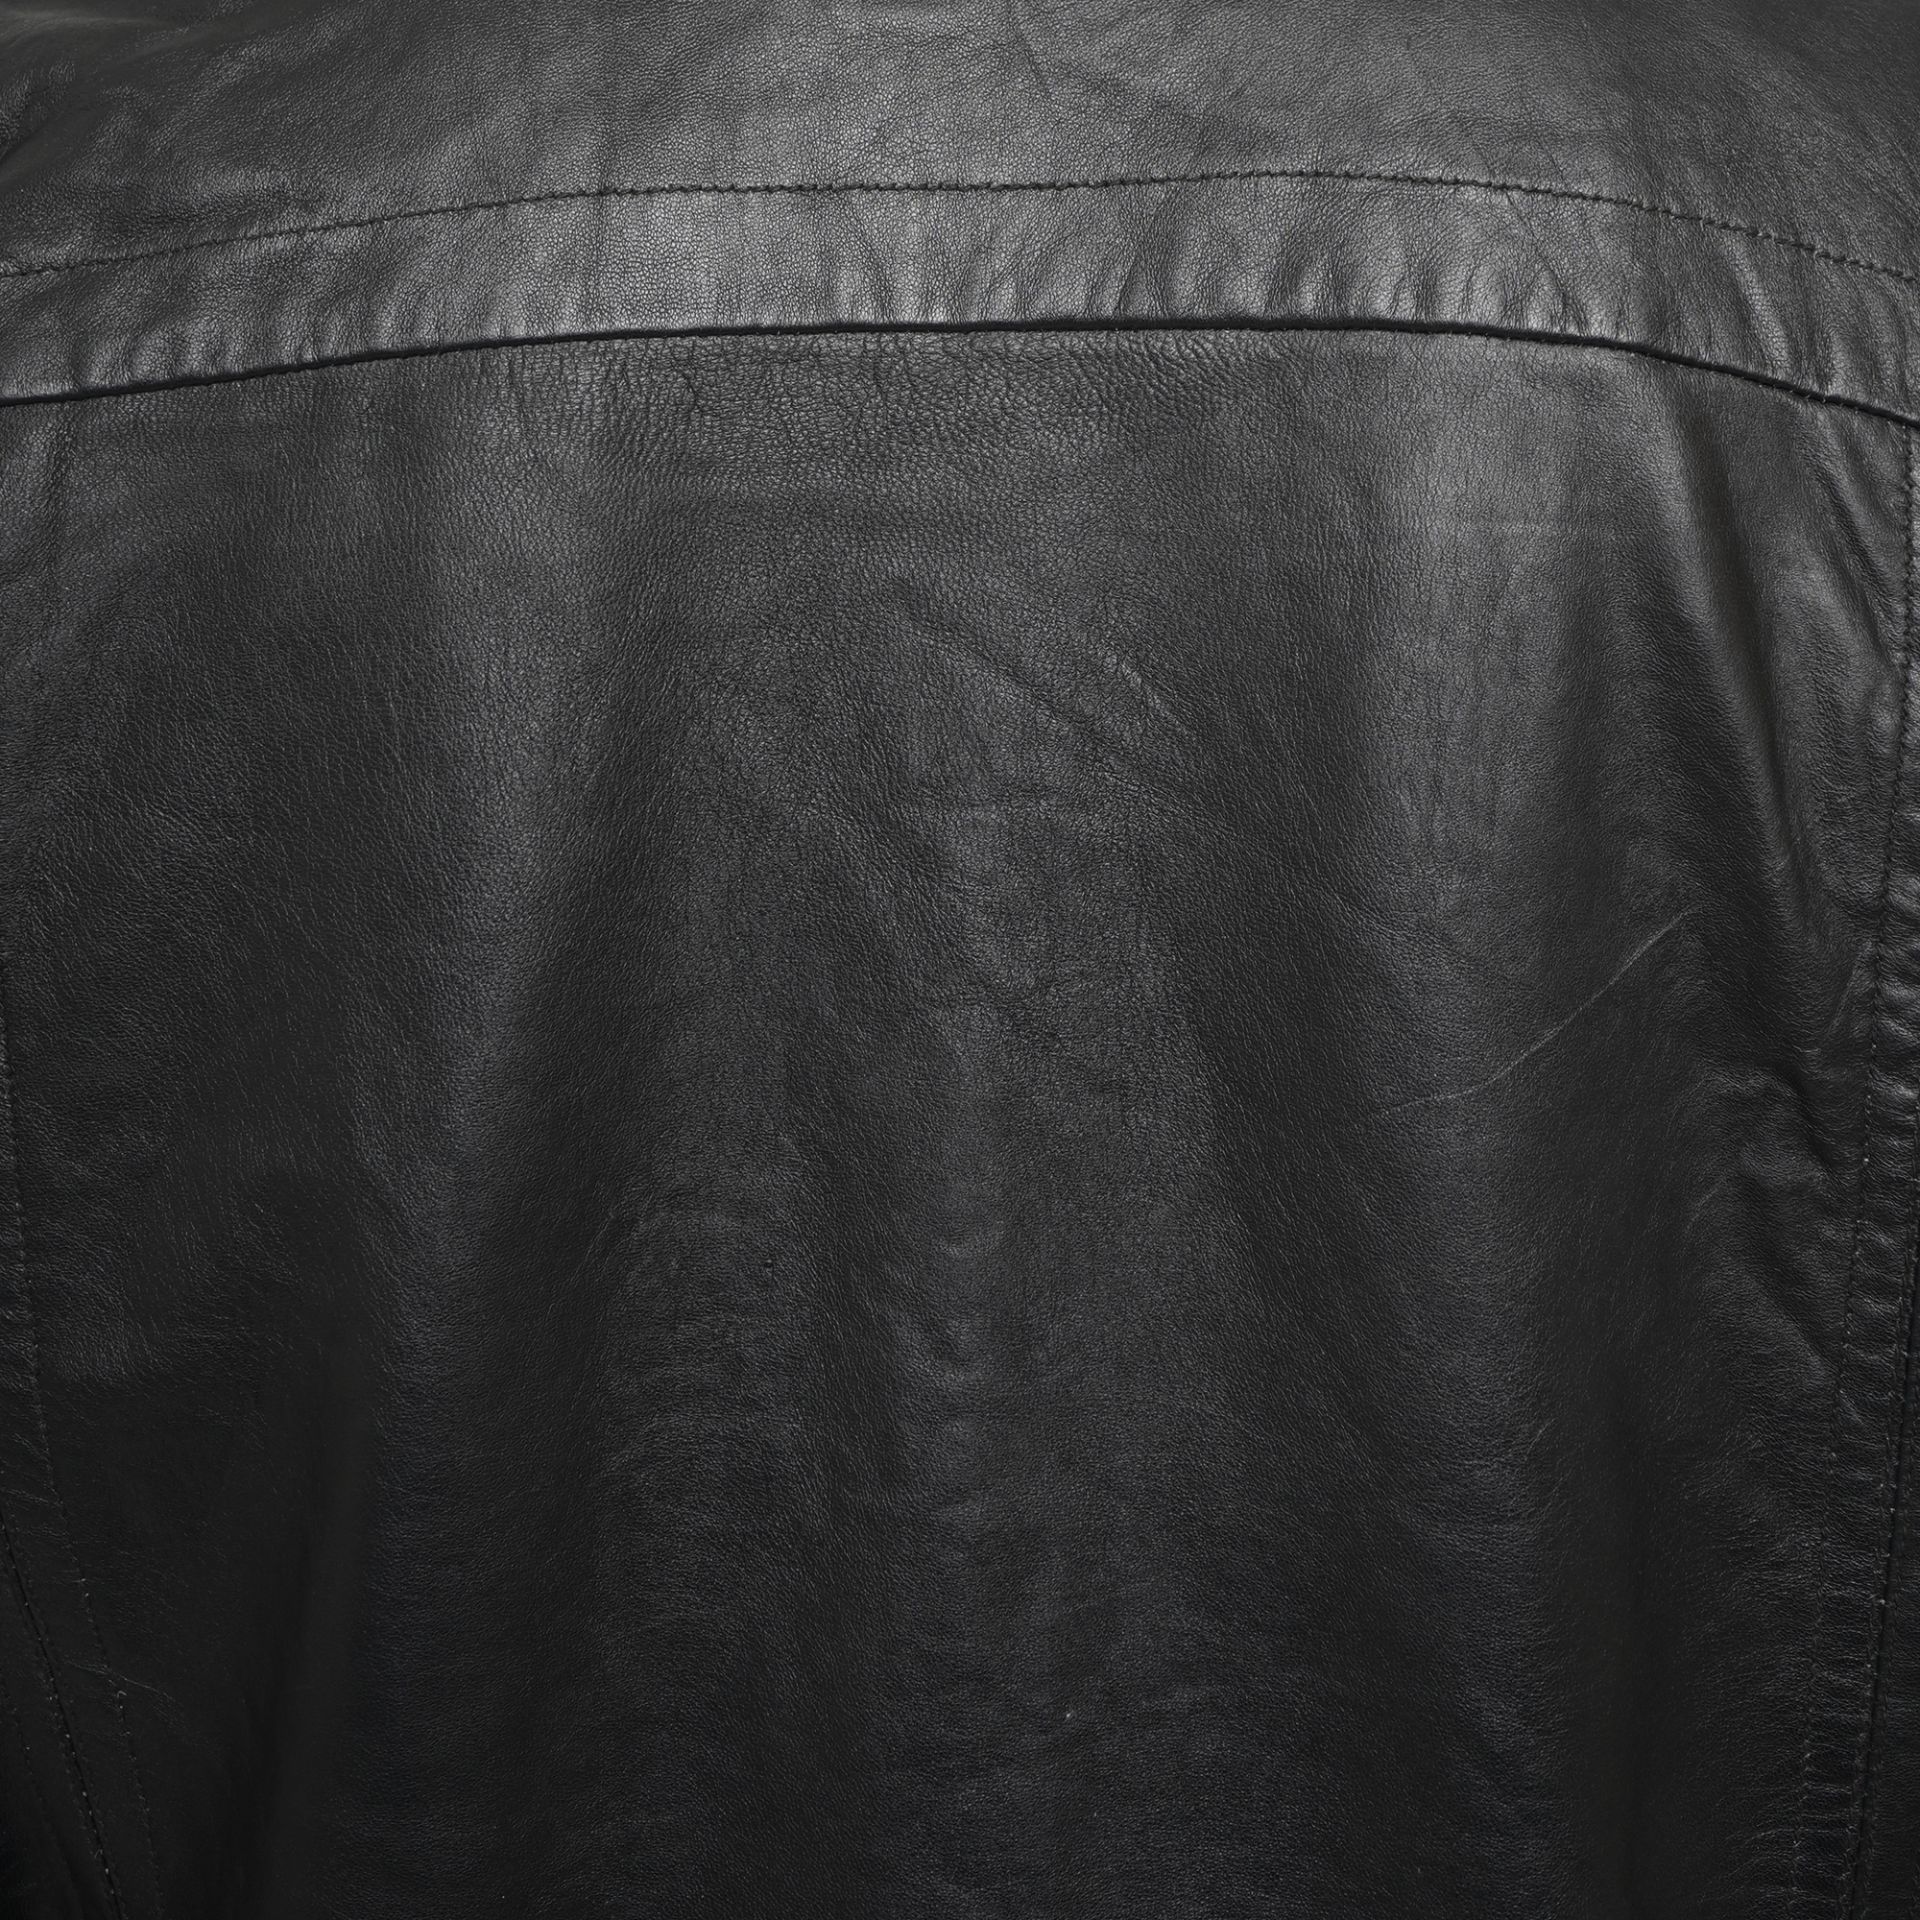 Approx. 800 x Men's Classic Heavy Duty Leather Jacket - Image 4 of 4